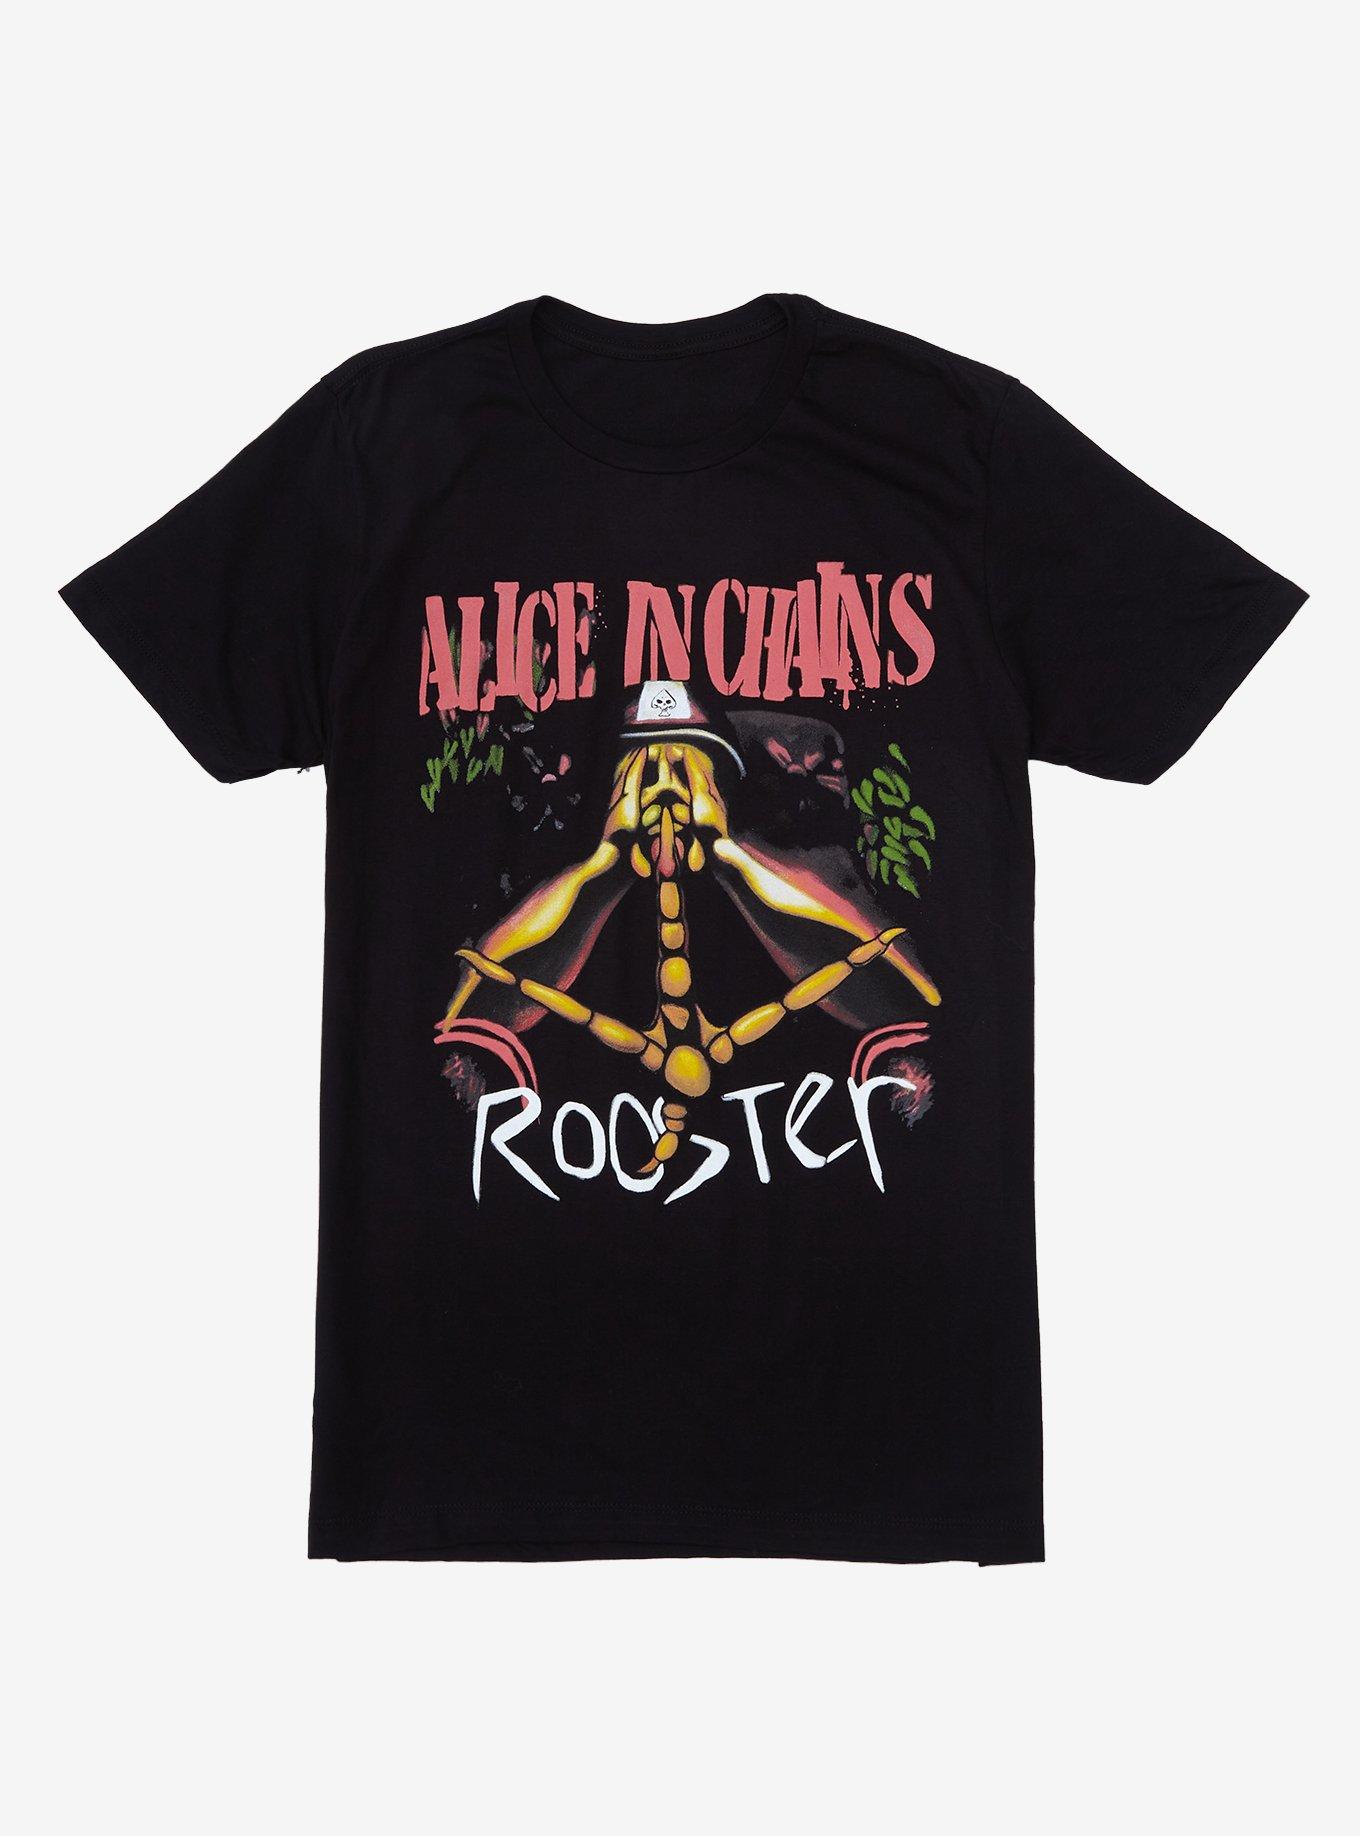 Alice In Chains Rooster 1993 T-Shirt, BLACK, hi-res